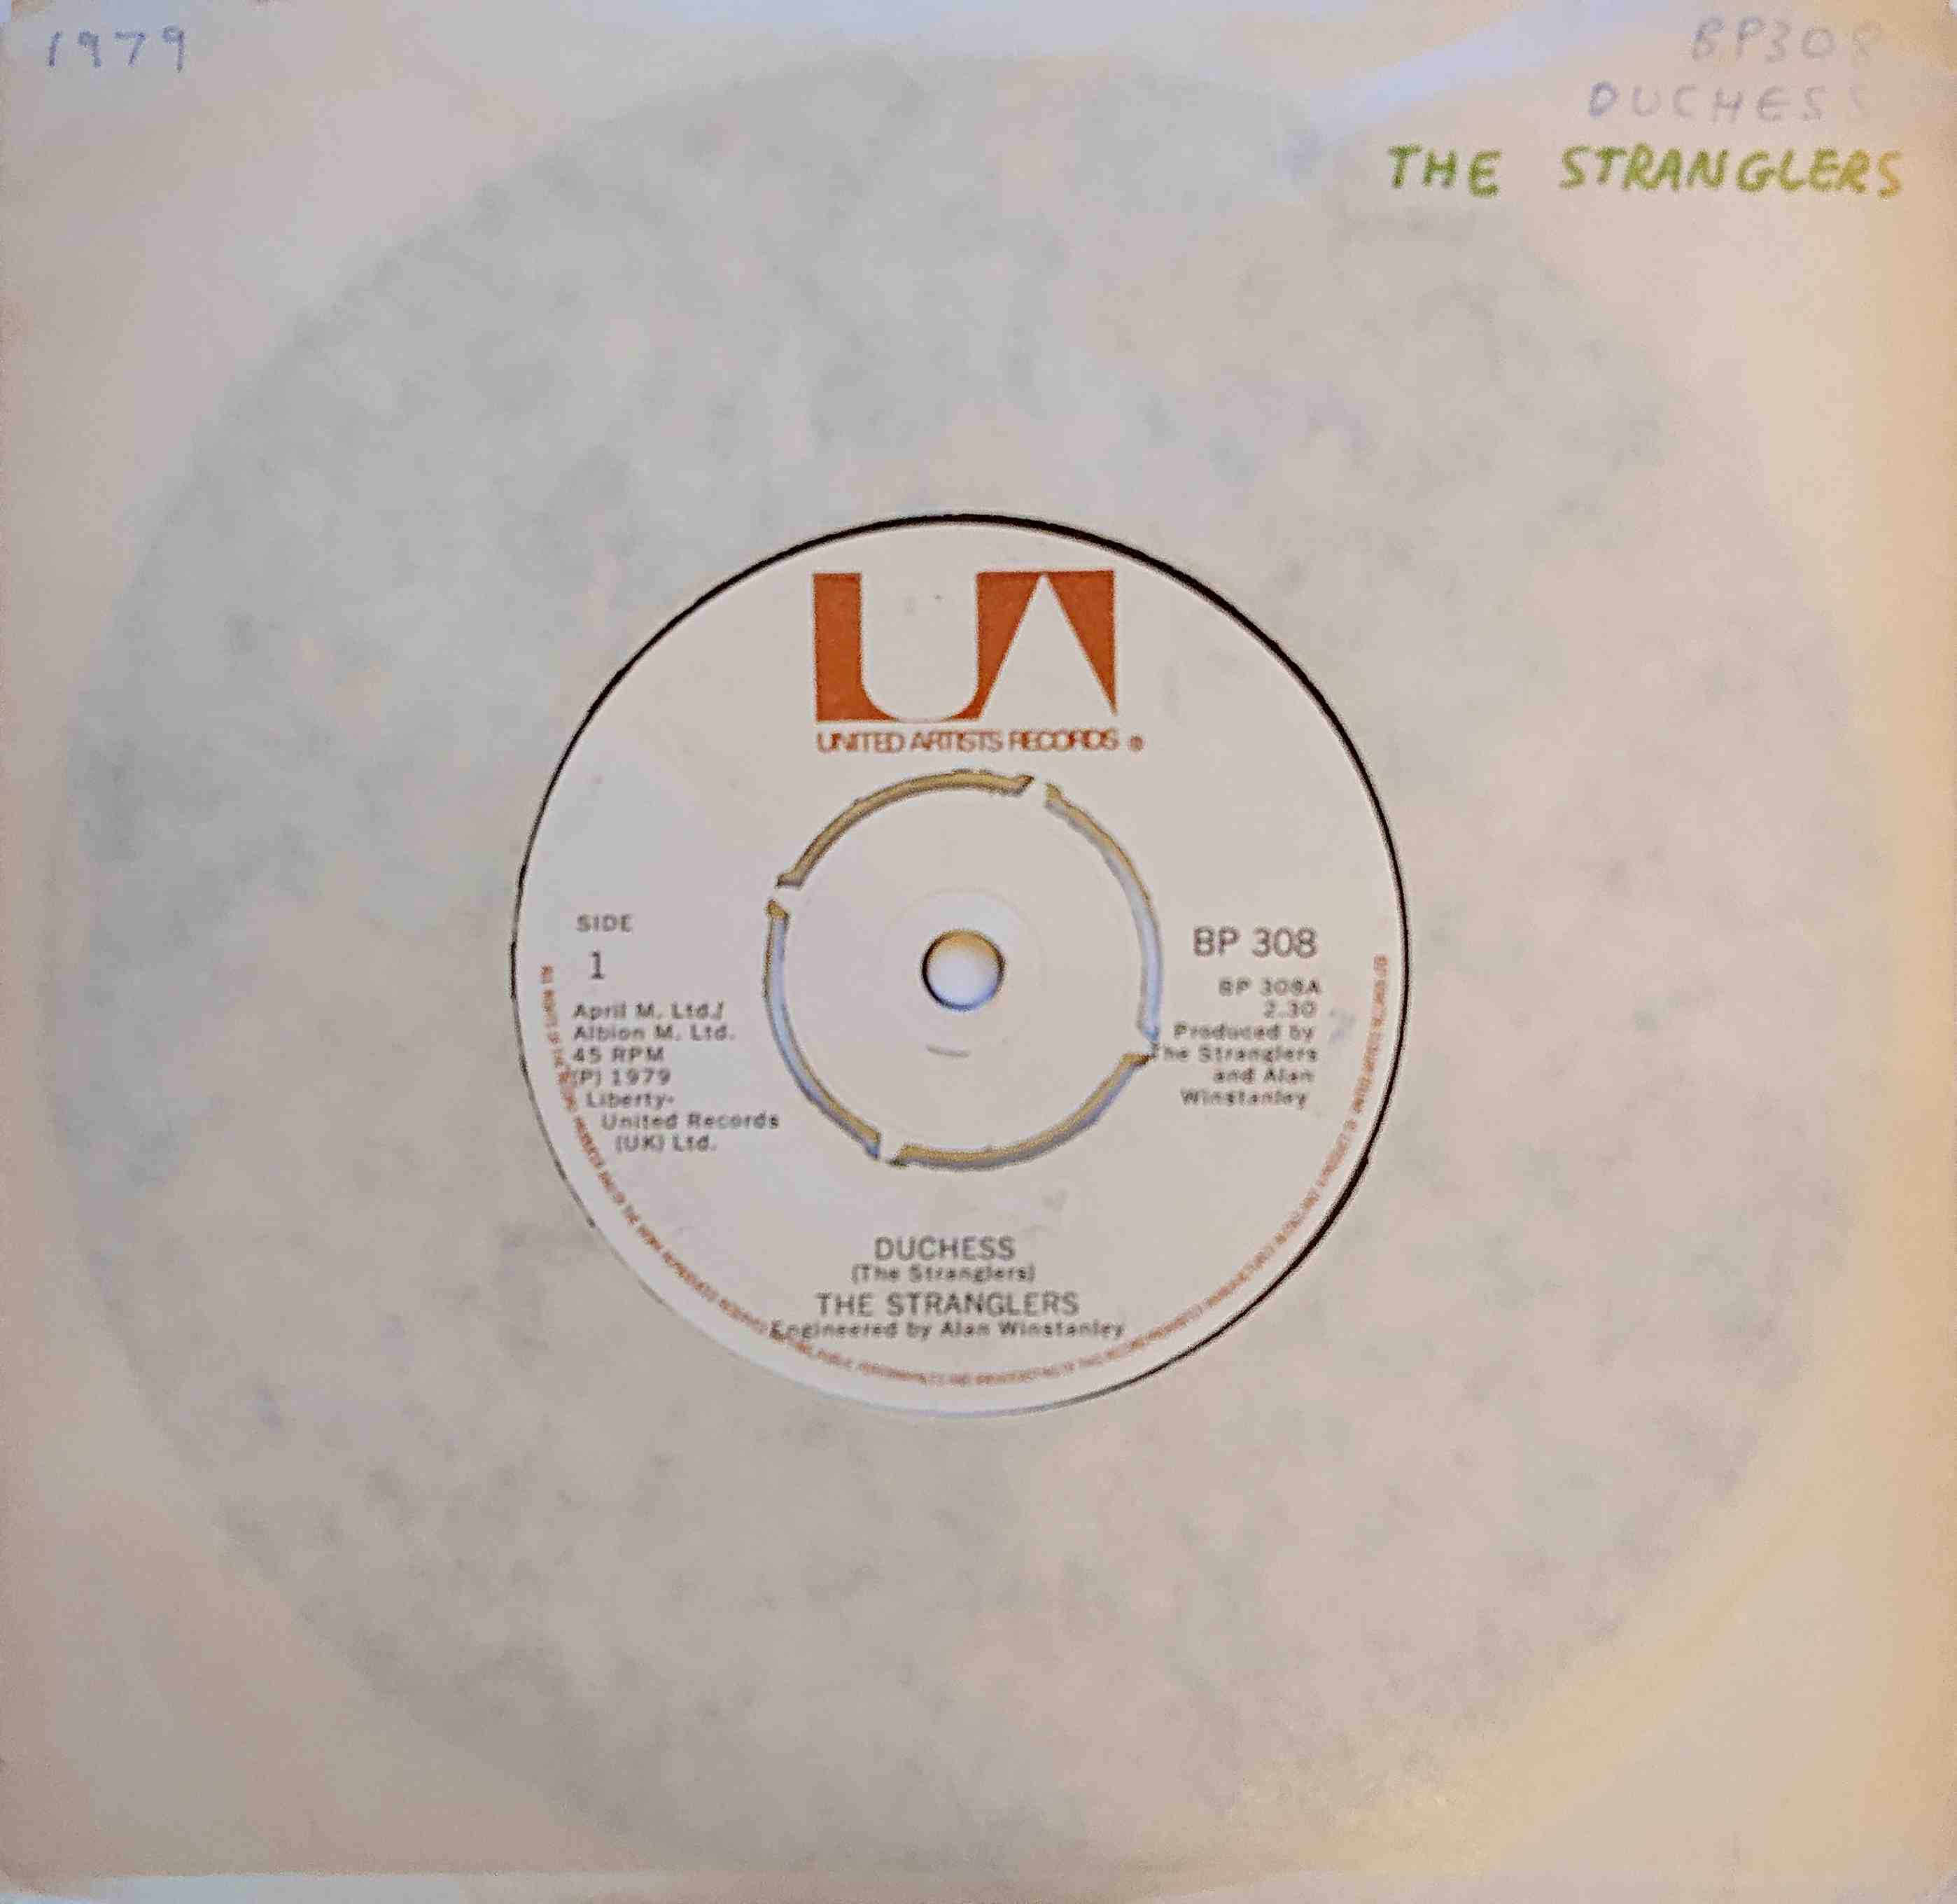 Picture of Duchess by artist The Stranglers from The Stranglers singles